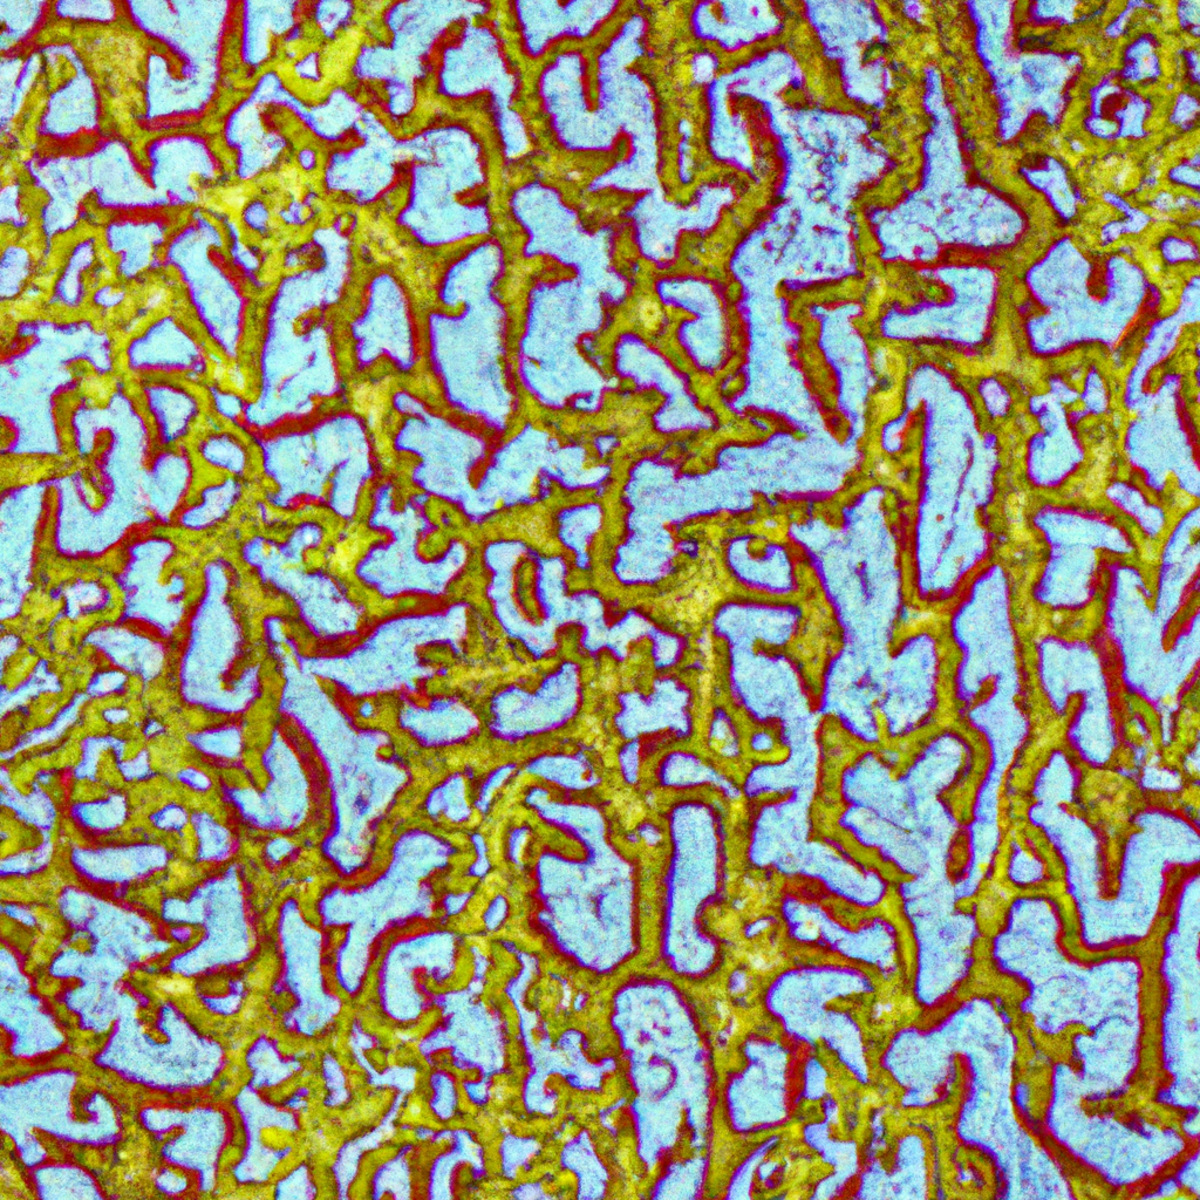 Close-up of stained microscope slide showcasing intricate network of interconnected tubes representing nephrons in kidneys.